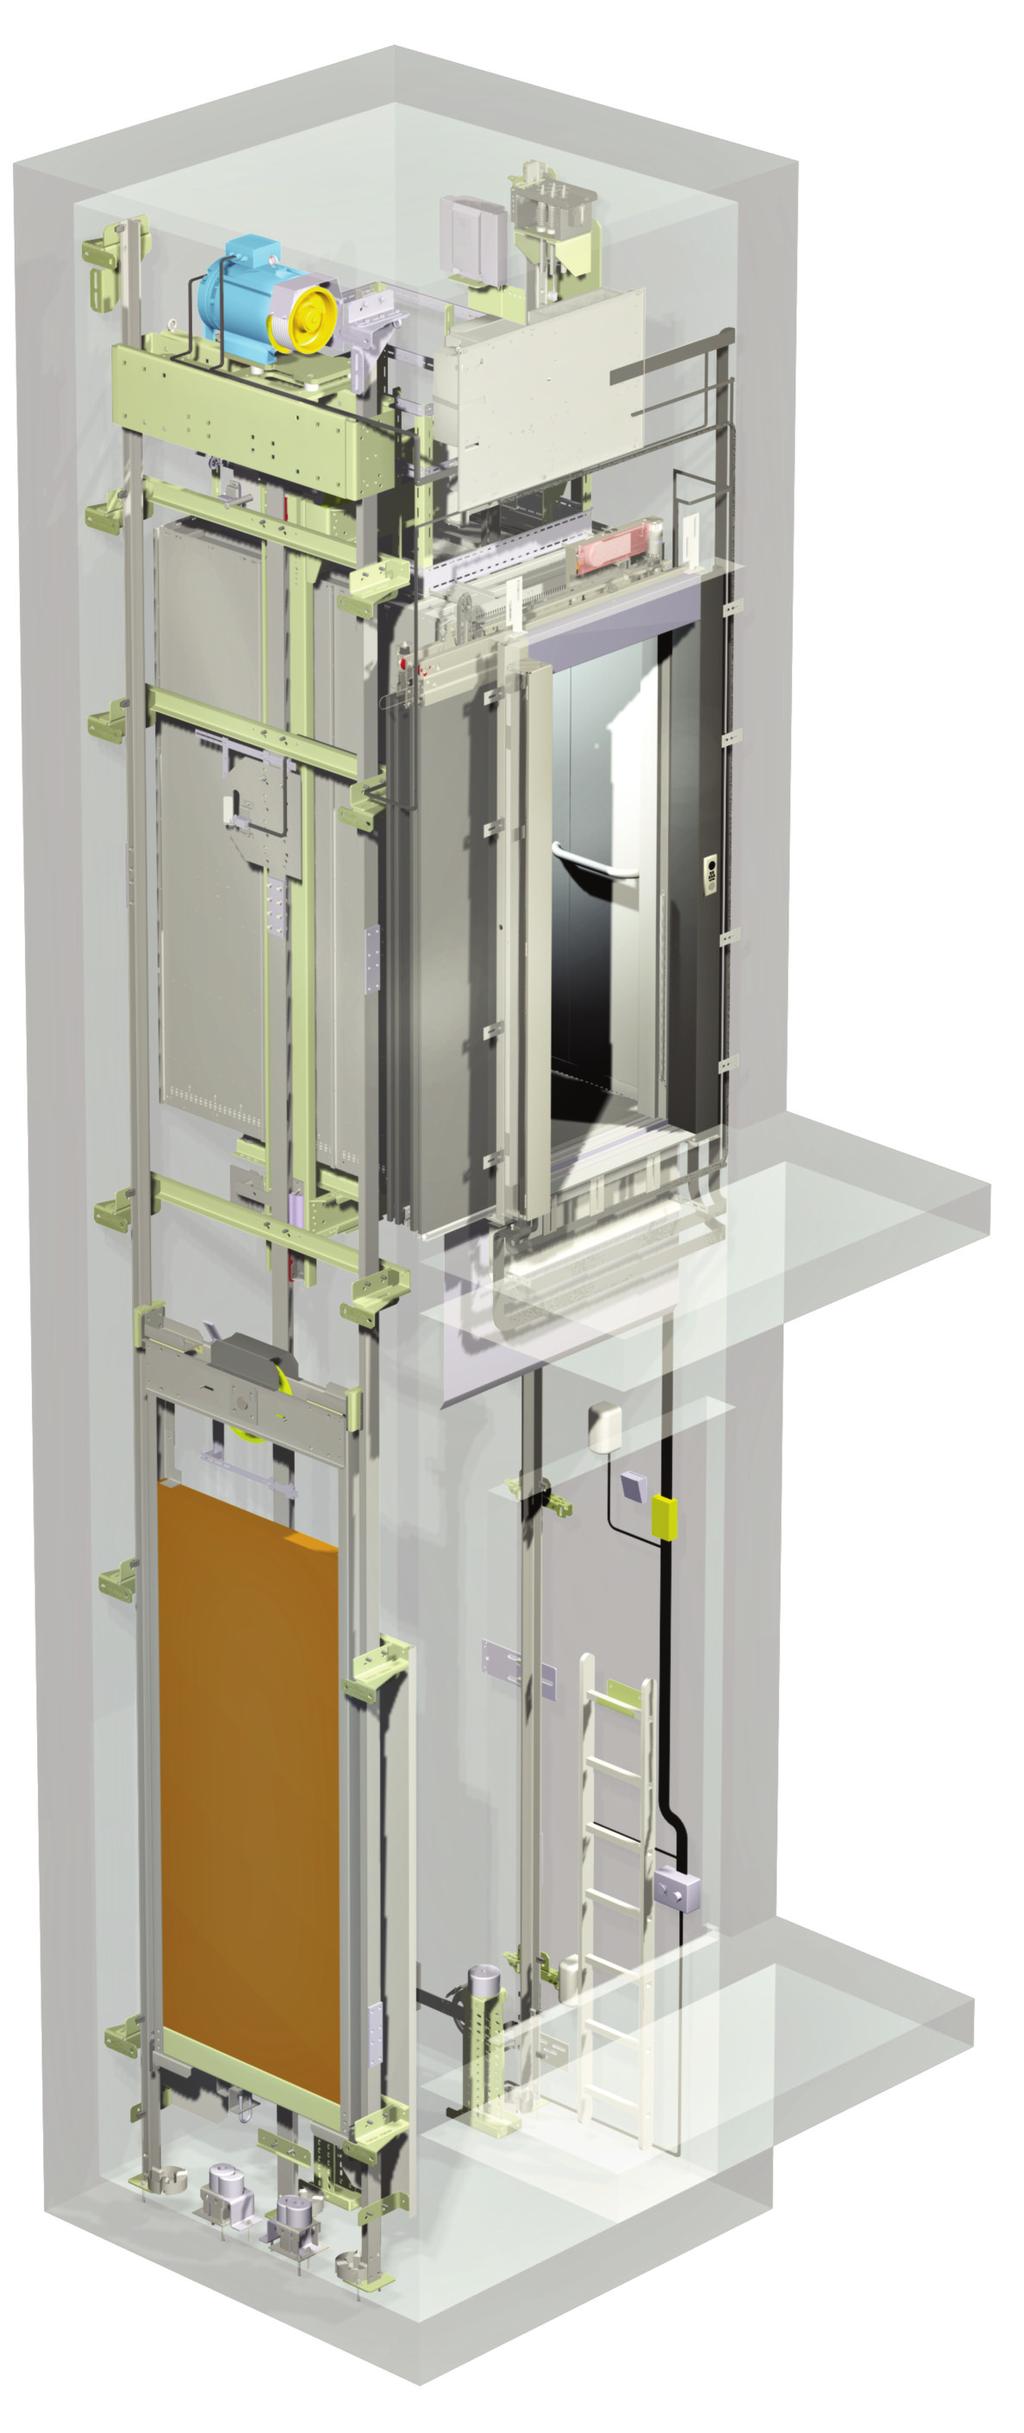 ADVANCED FEATURES THE WITTUR ANSWER TO THE CURRENT MRL MARKET REQUIREMENTS The, Wittur s new generation of machine roomless electric lift, offers an ideal solution for residential, commercial and